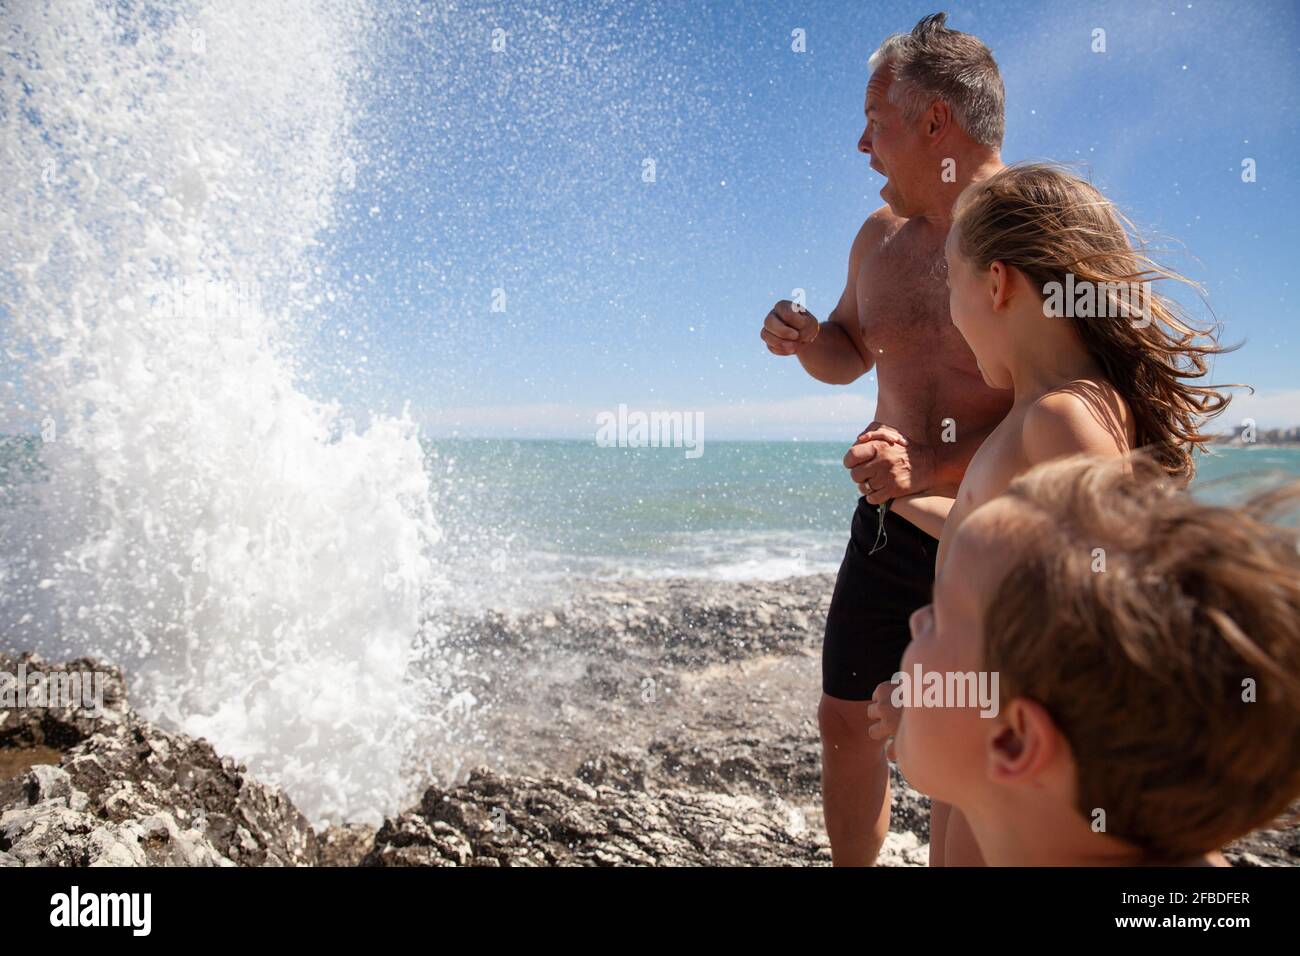 Father with children looking at water splash while standing on rock Stock Photo